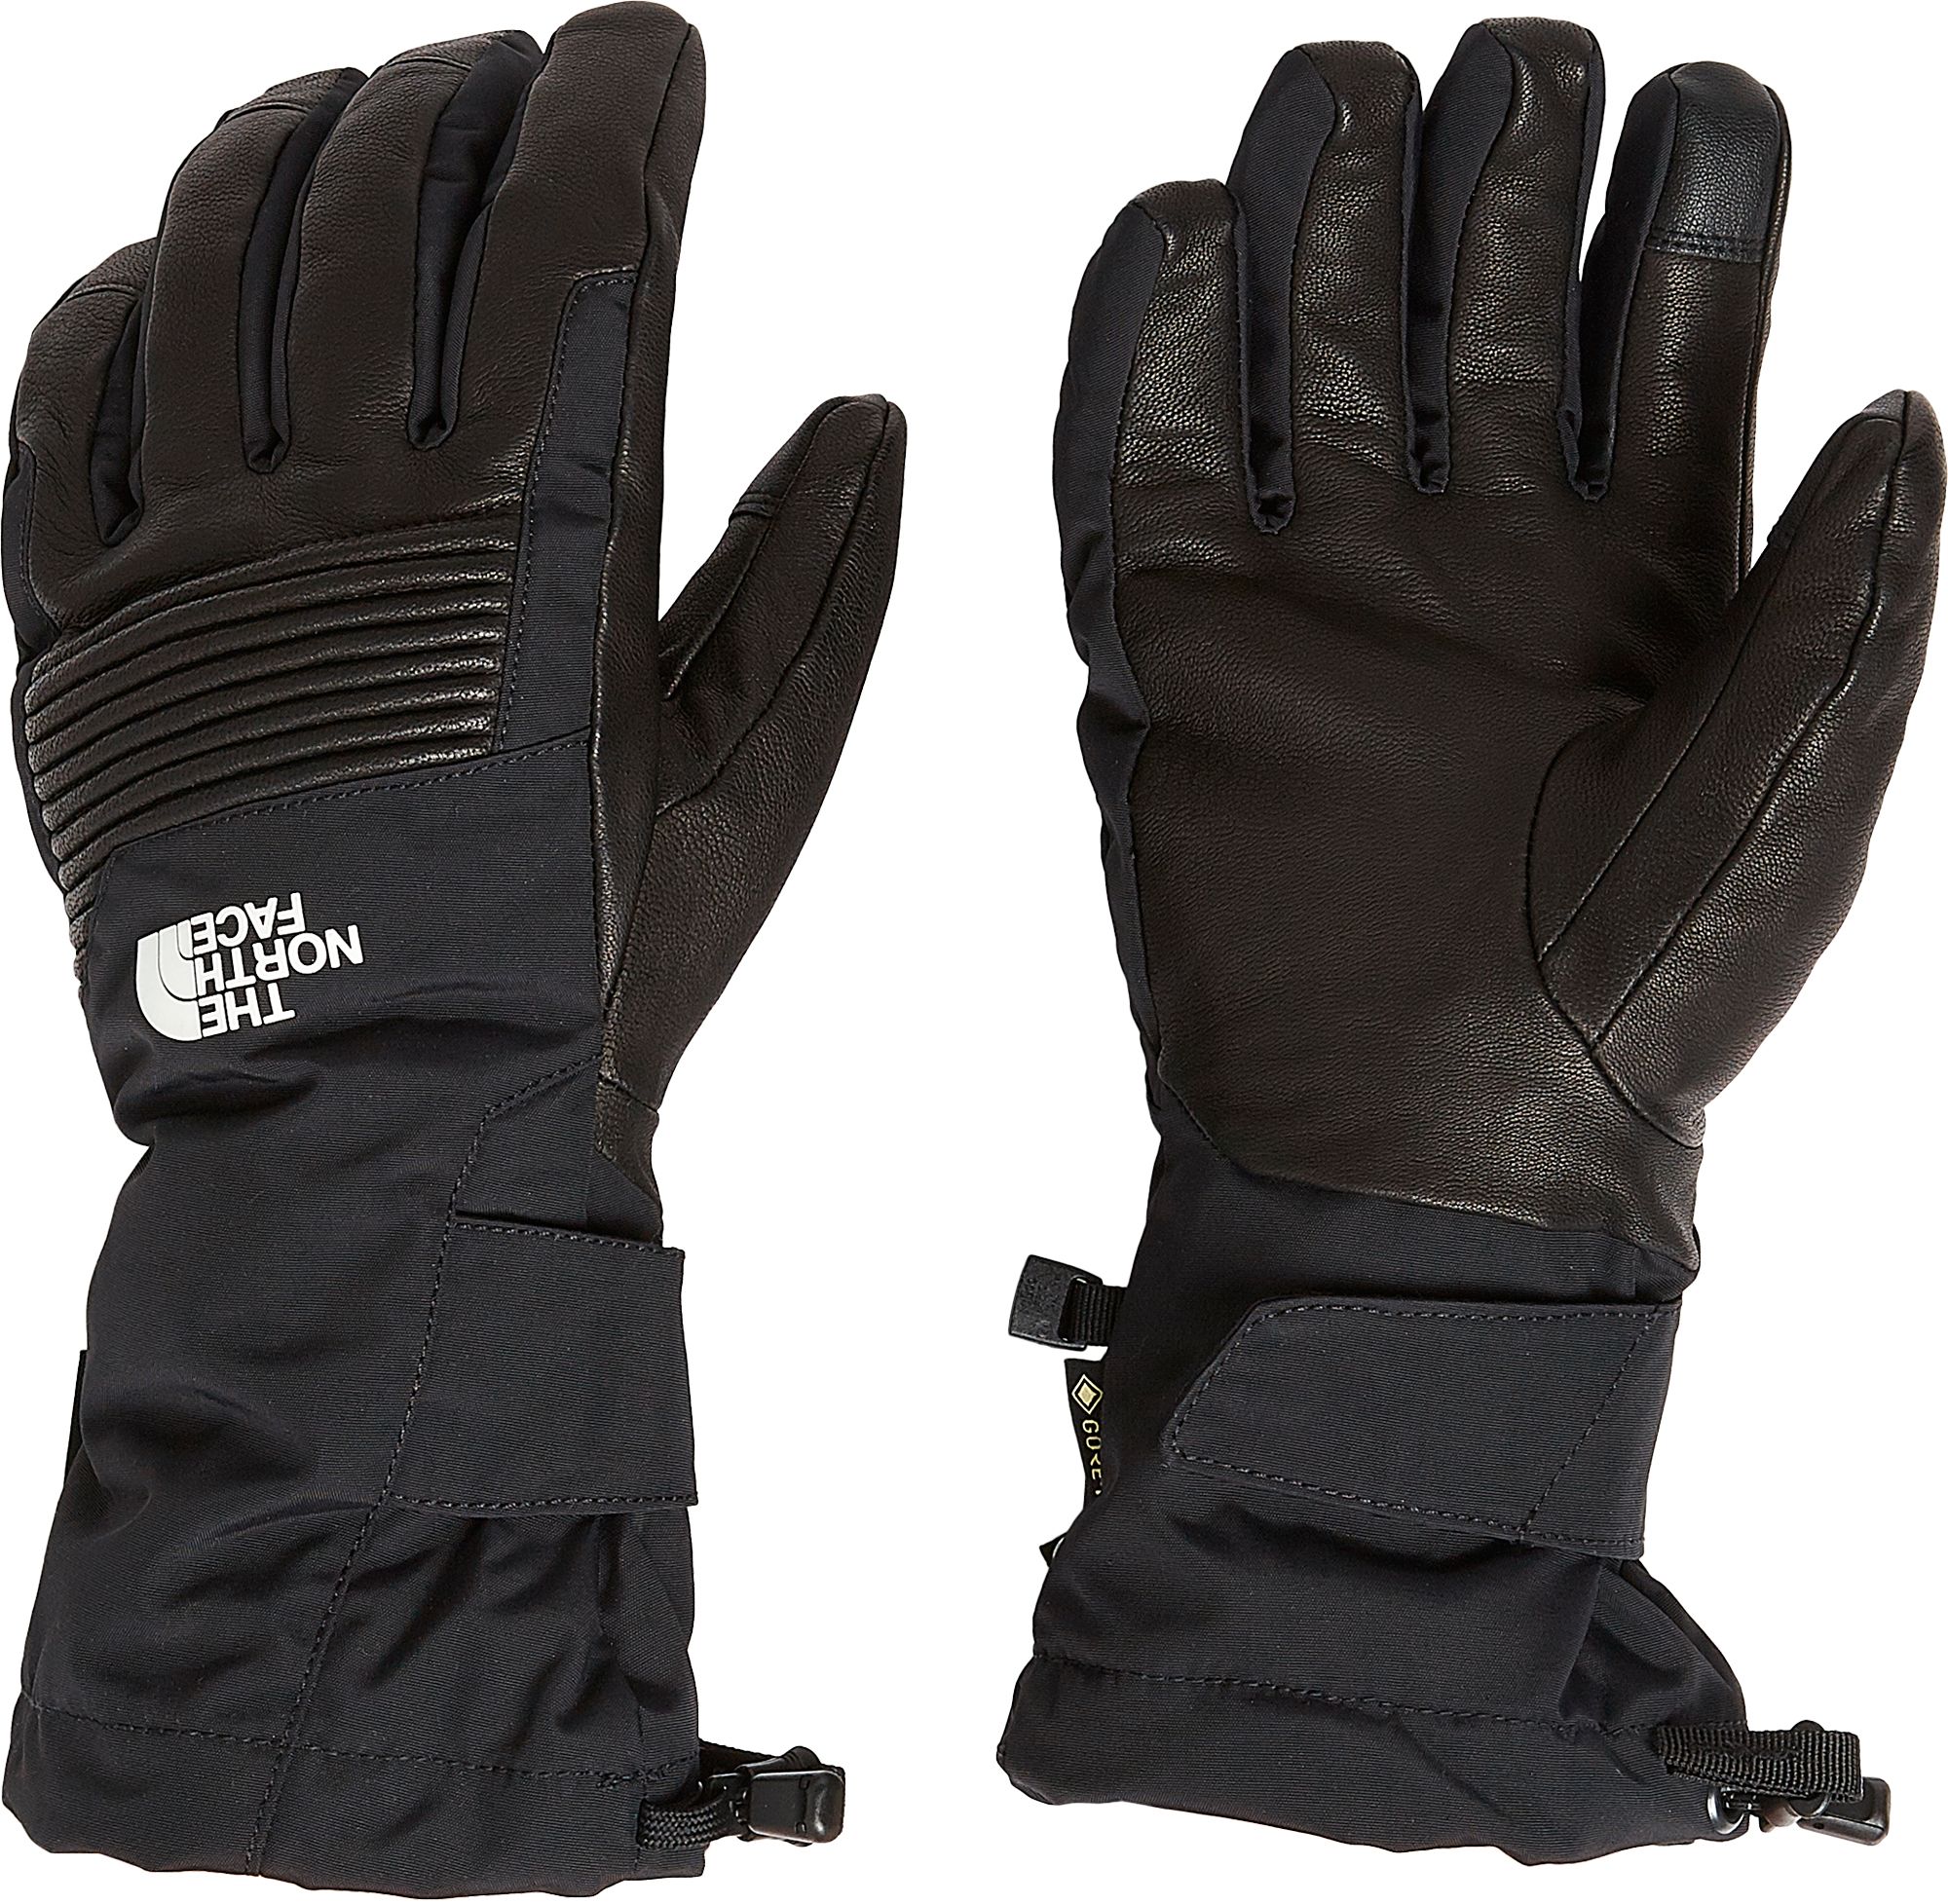 north face powdercloud gloves review